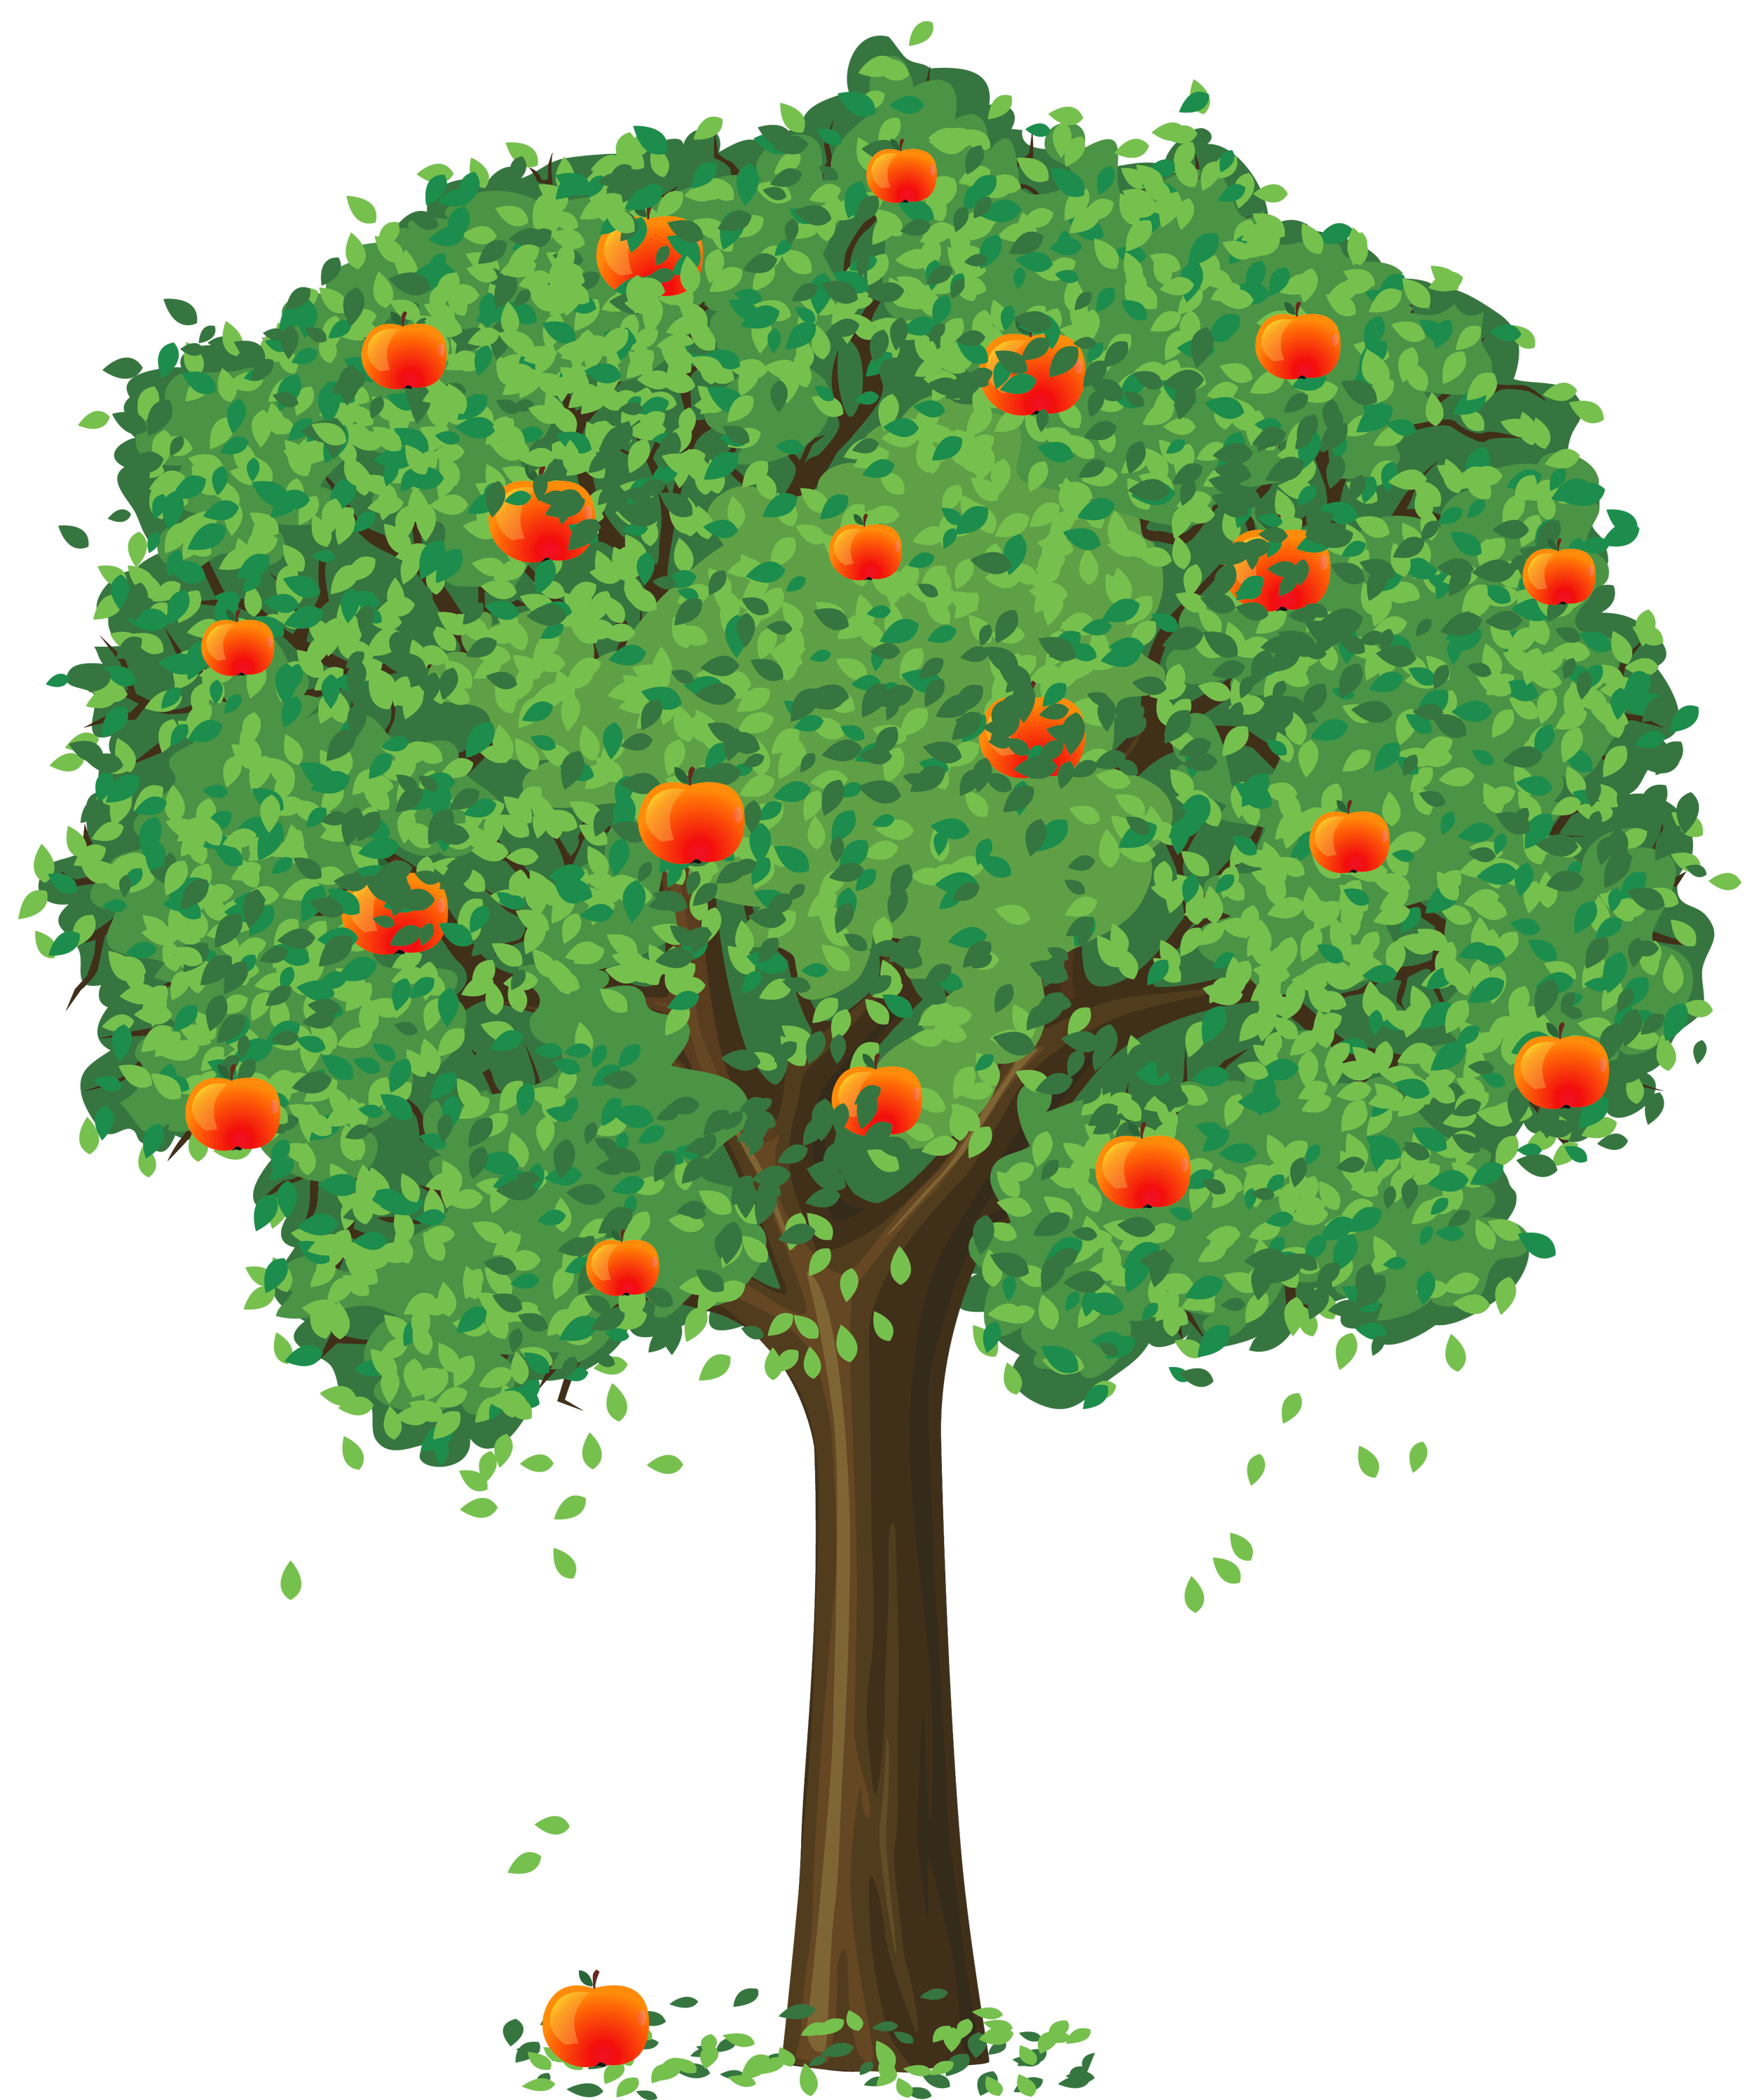 Painted Apple Tree PNG Clipart